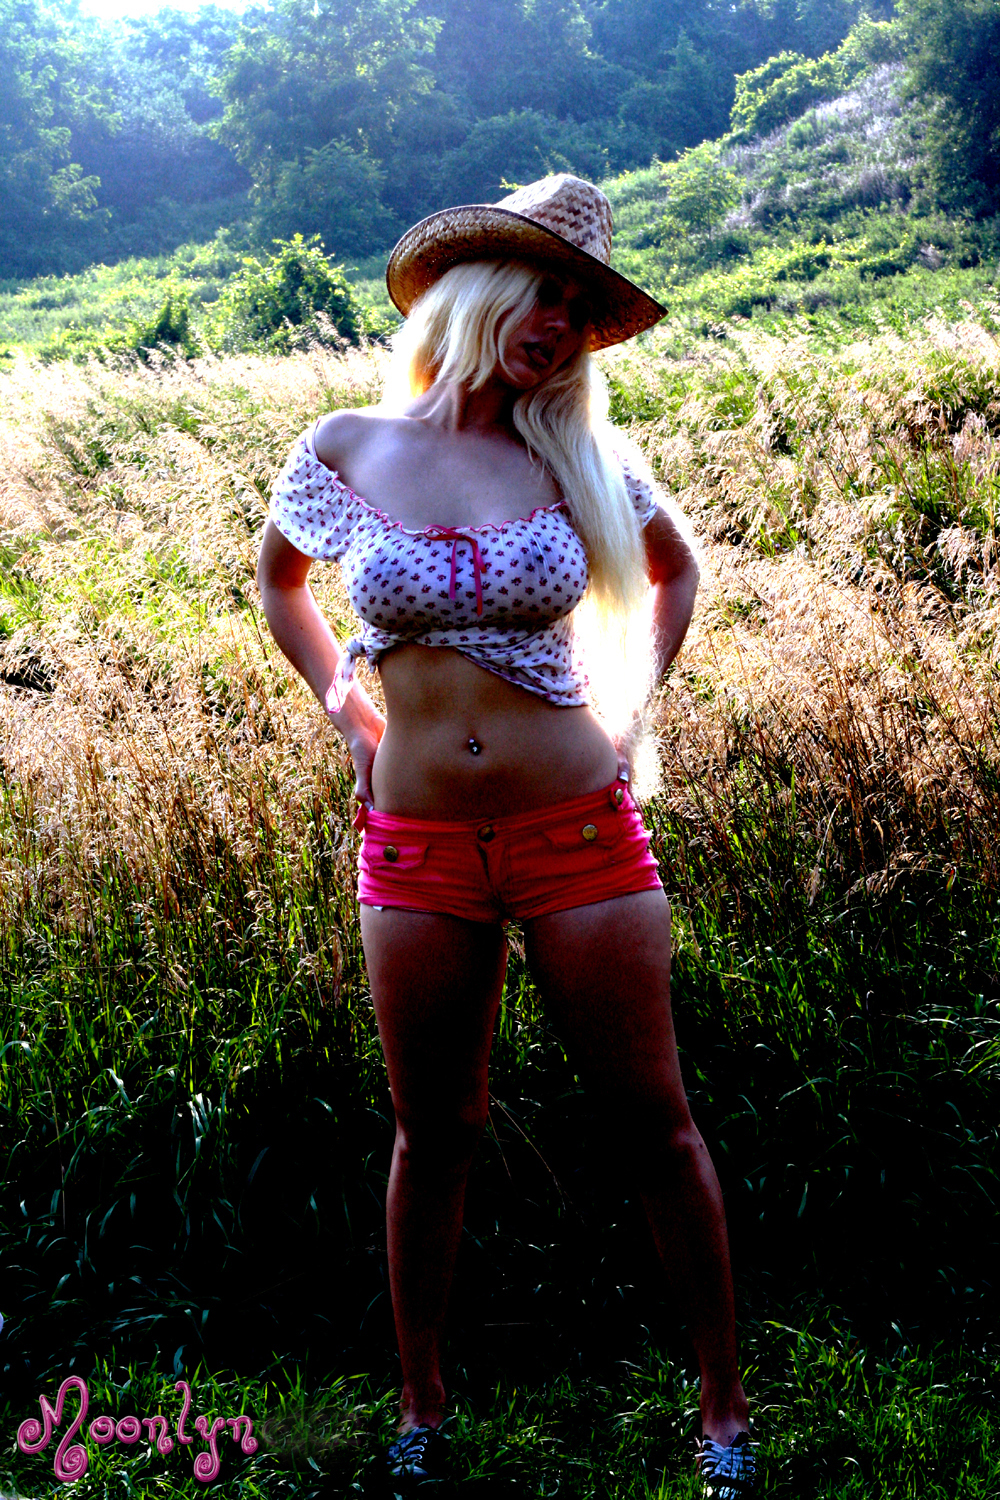 Psychedelic_Cowgirl.jpg Moonlyn, Moonlyn Music, Moonlyn as Cowgirl, Sexy Cowgirl, Sluty Cowgirl, Blonde Cowgirl, Big Breasts, ass, hot ass, heart-shaped ass, tits, hard nipples, see-through top, high cut jean shorts, daisy dukes shorts, tiny shorts